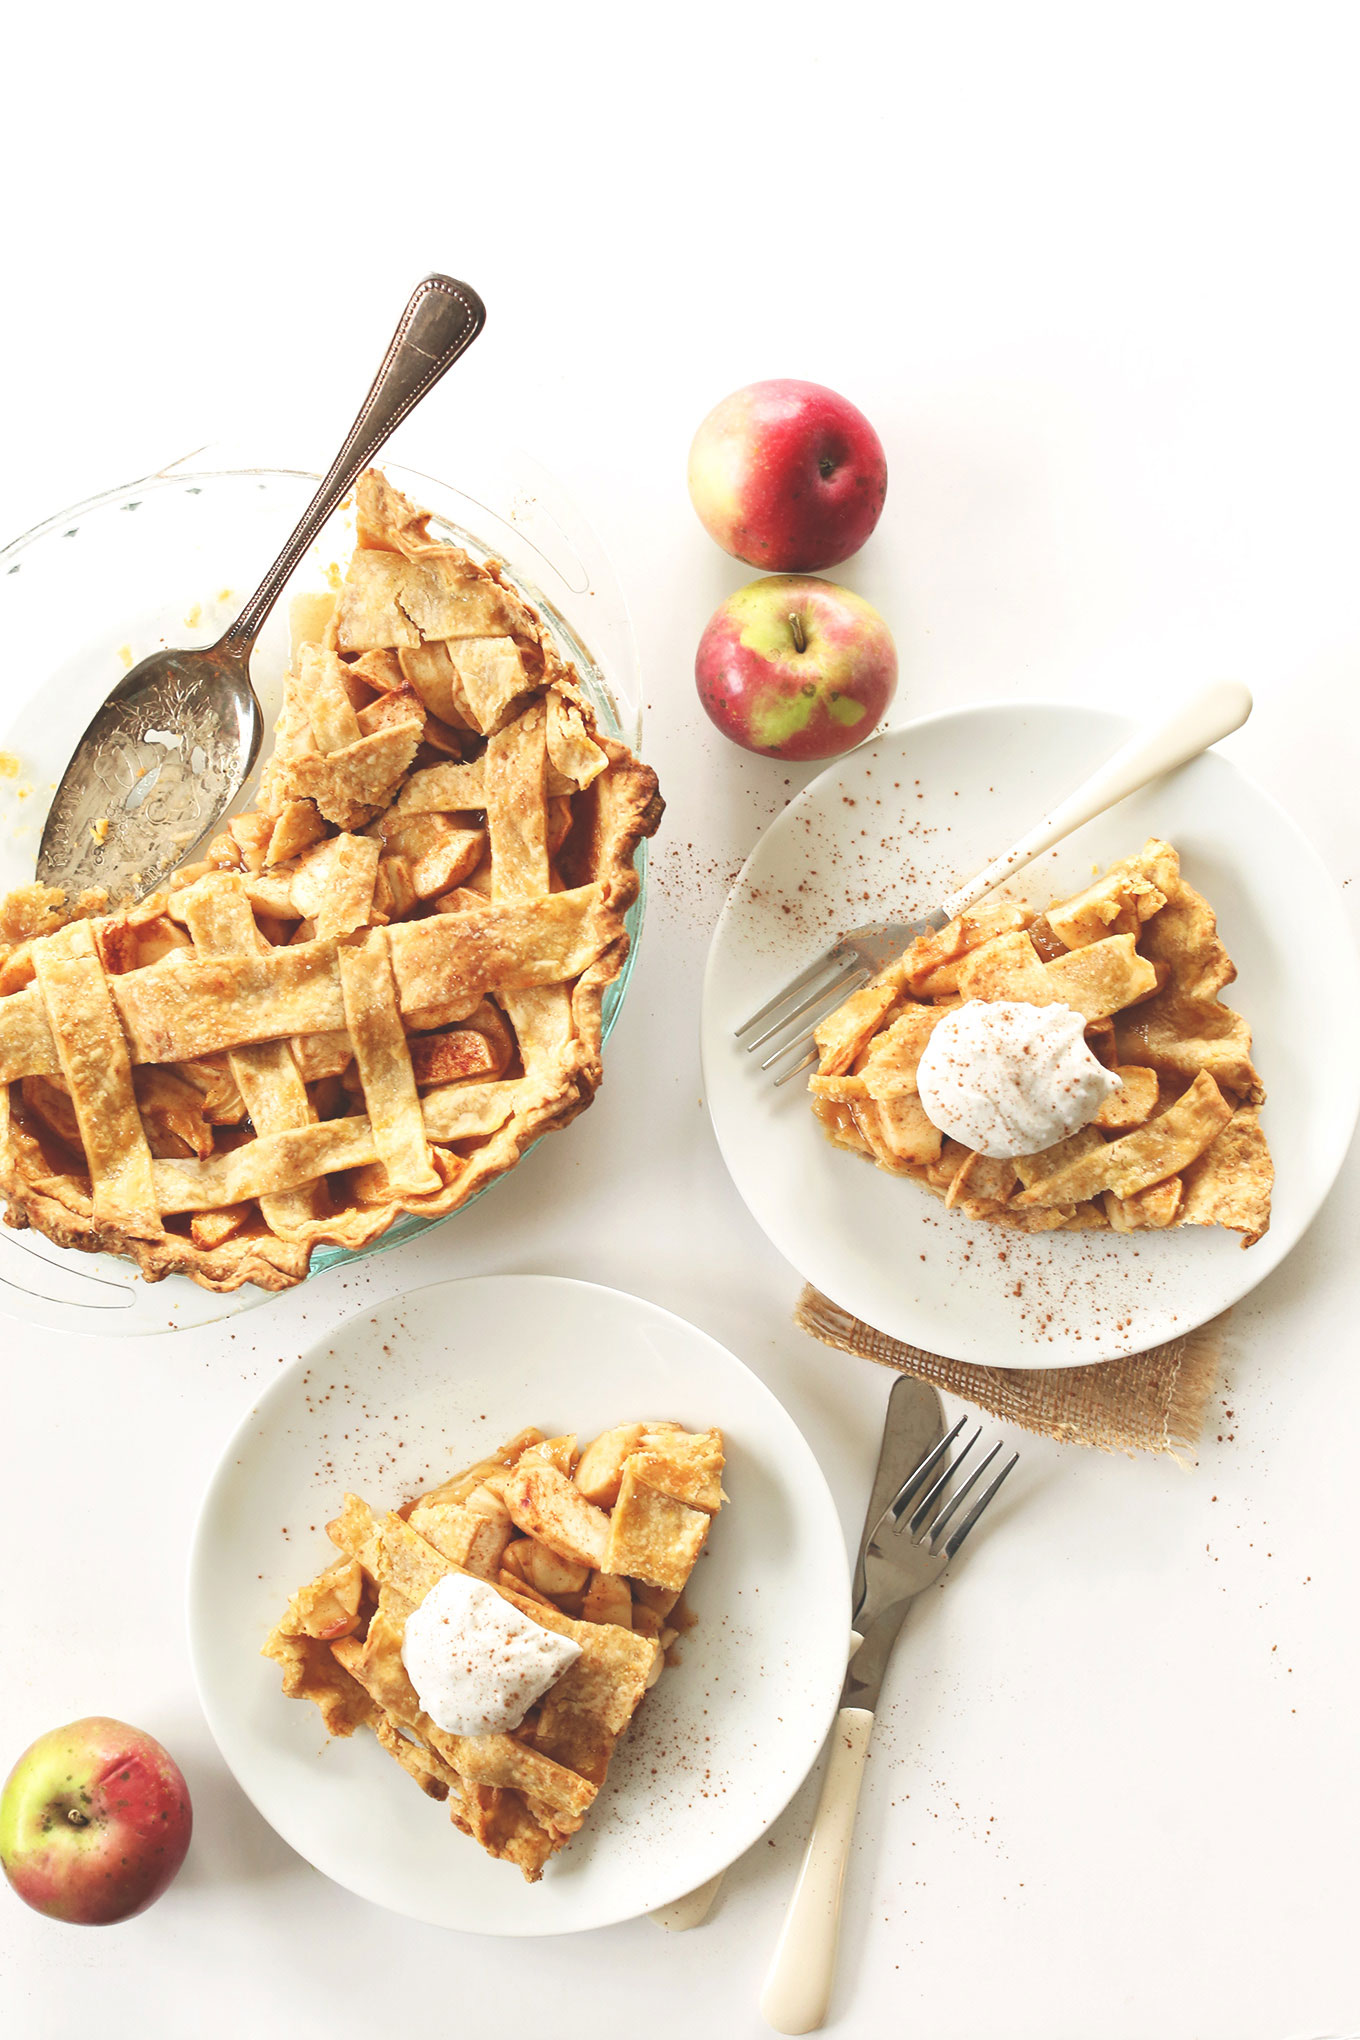 Slices of vegan Pumpkin Spiced Apple Pie with a lattice topping